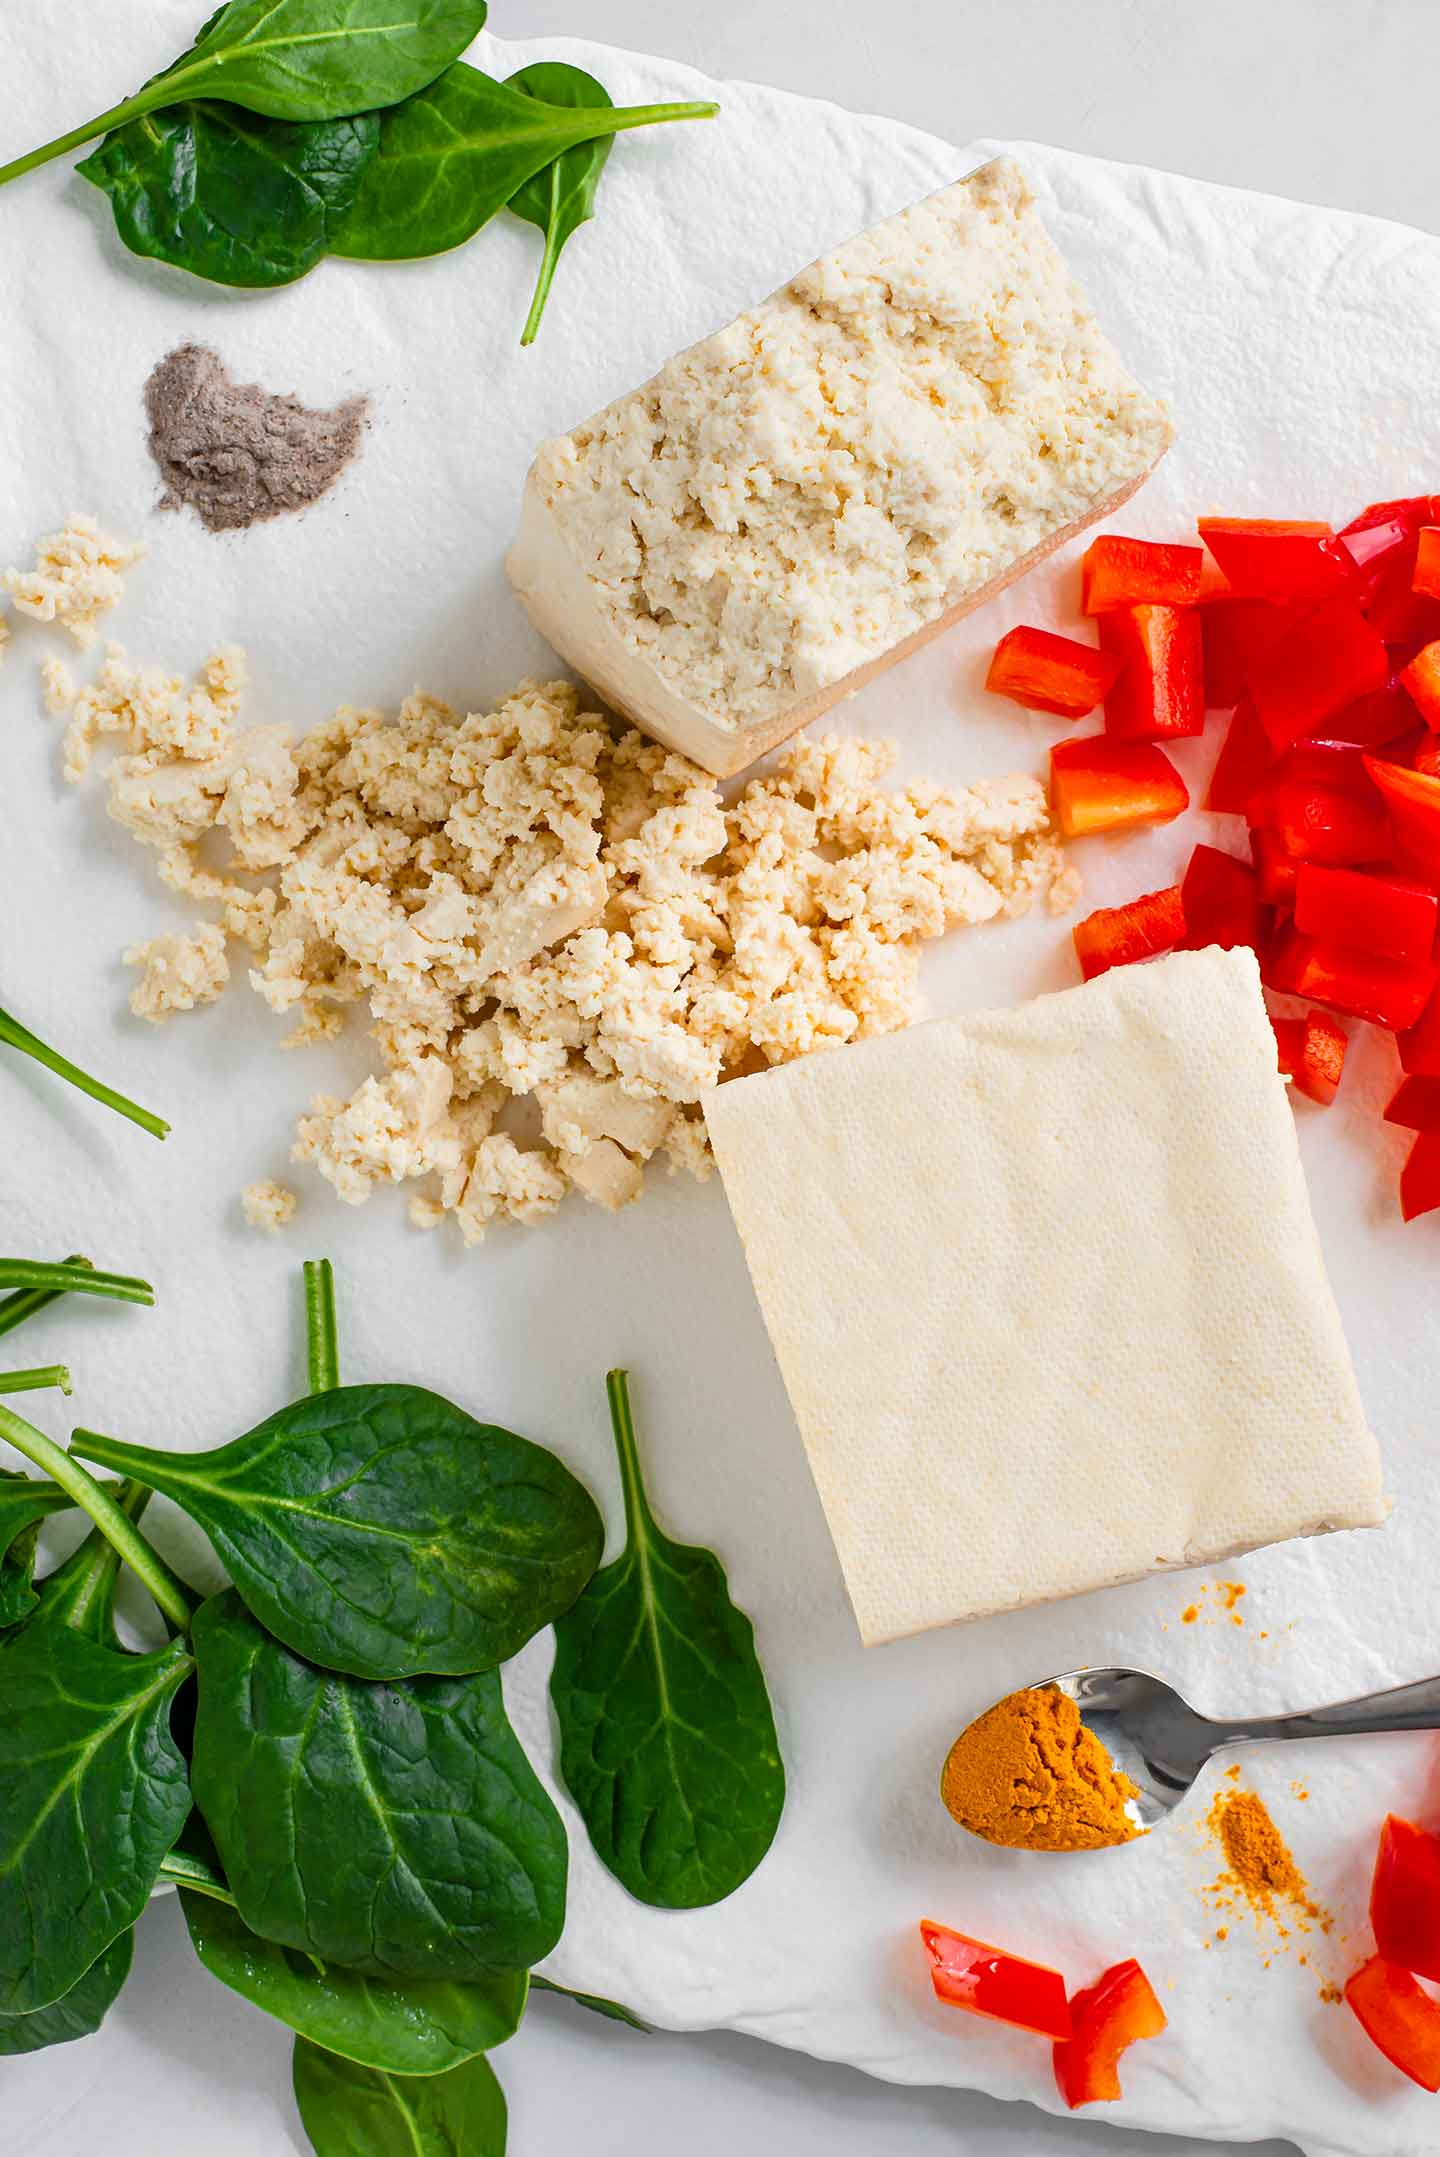 Top down view of quick, easy scramble ingredients. A block of firm tofu is cut in half with one part crumbled. Ground turmeric, black salt, spinach, and diced red pepper surround the tofu on a white tray.